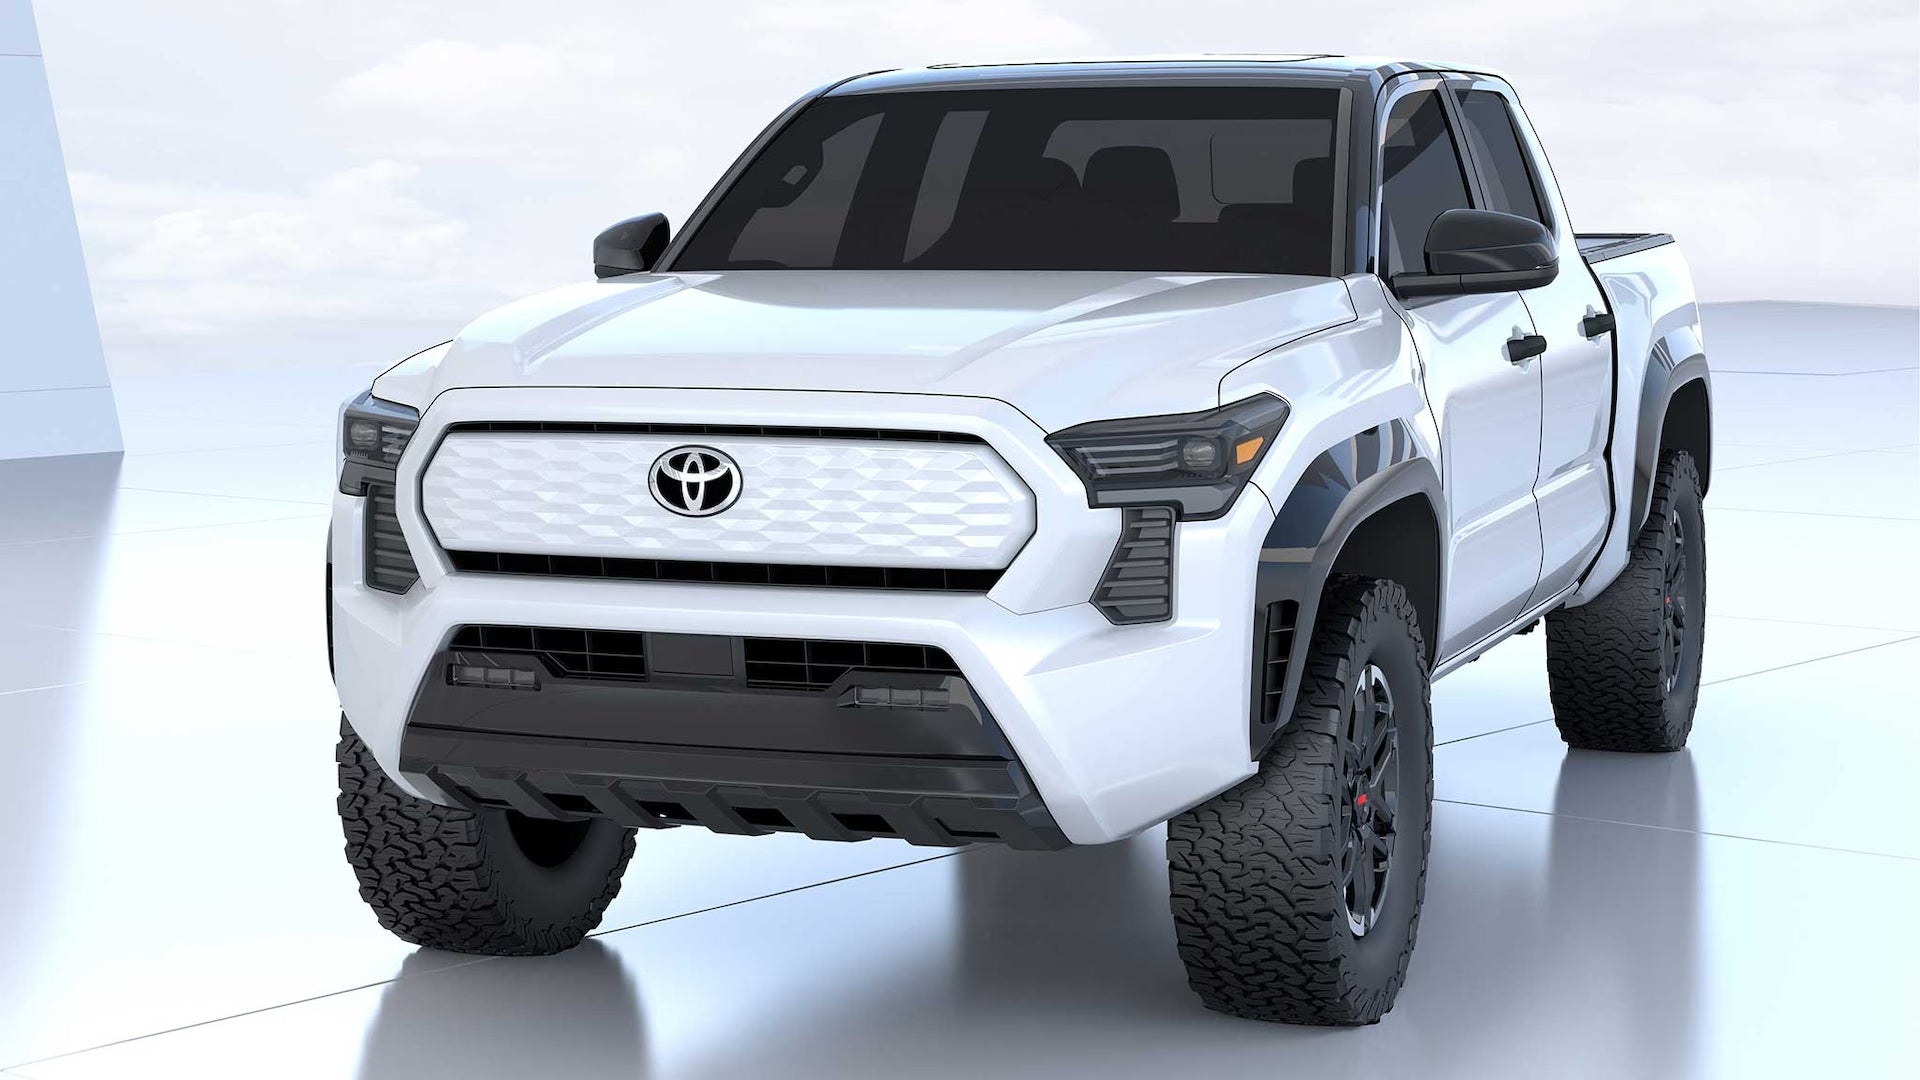 Toyota’s Electrification Drive: Tacoma and Tundra Pickups to Go Electric